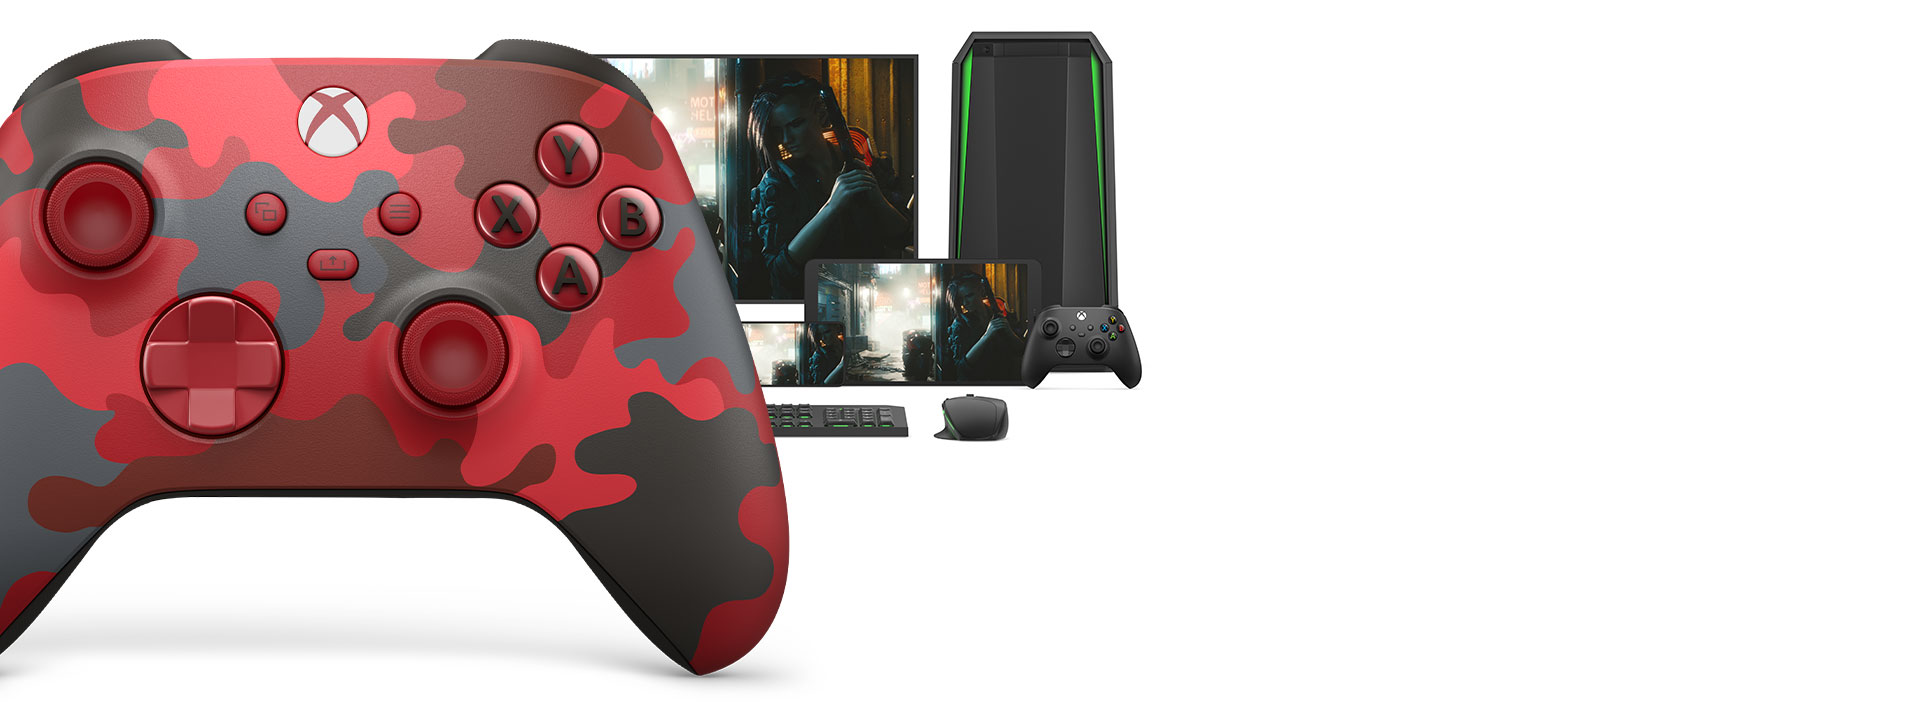 Xbox Wireless Controller daystrike camo with a computer, TV, and mobile devices